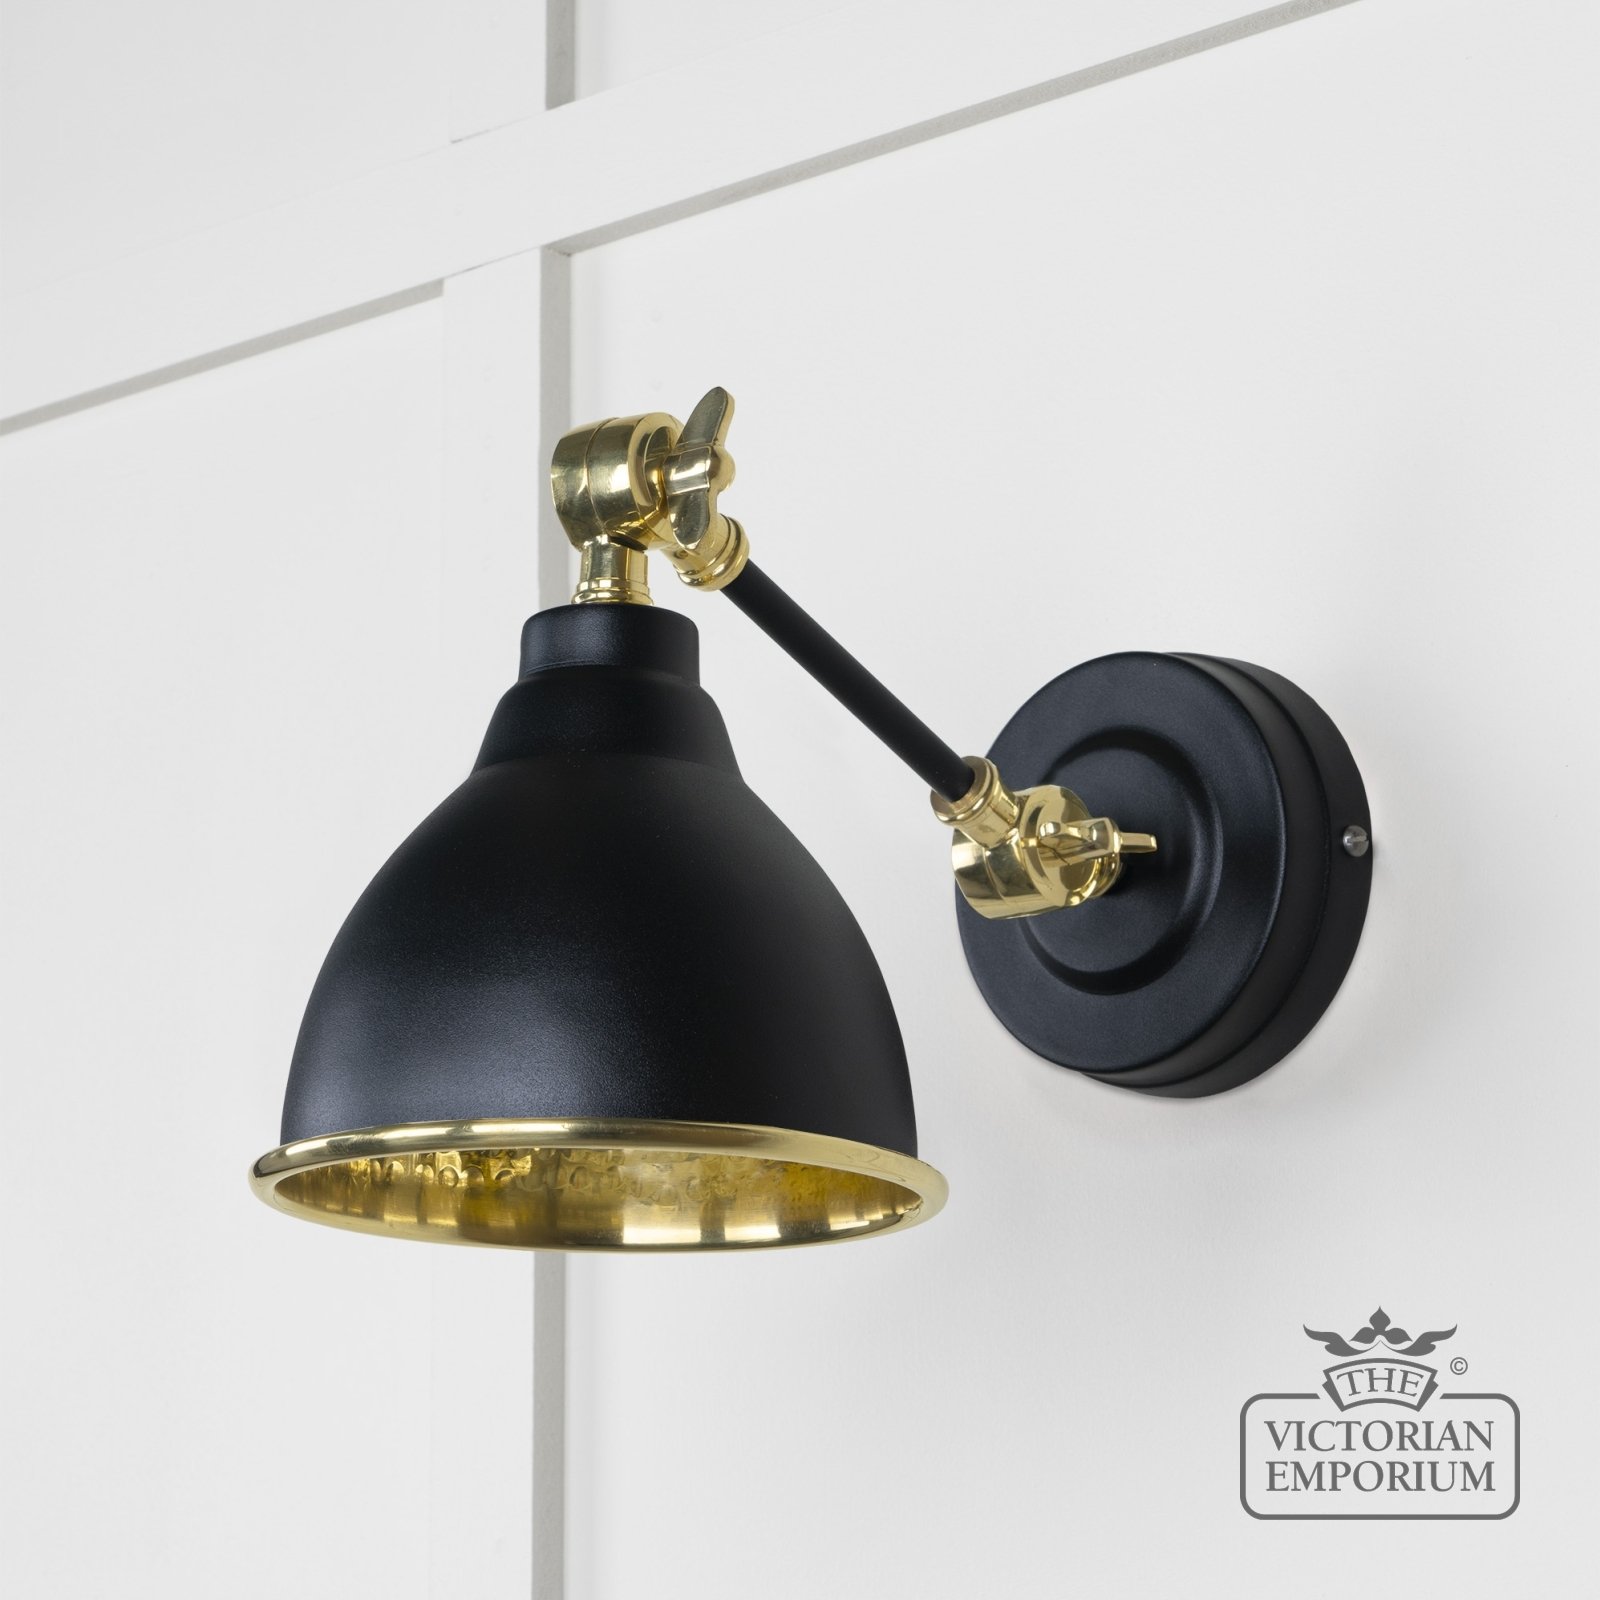 Brindle Wall Light in Hammered Brass with Black Exterior